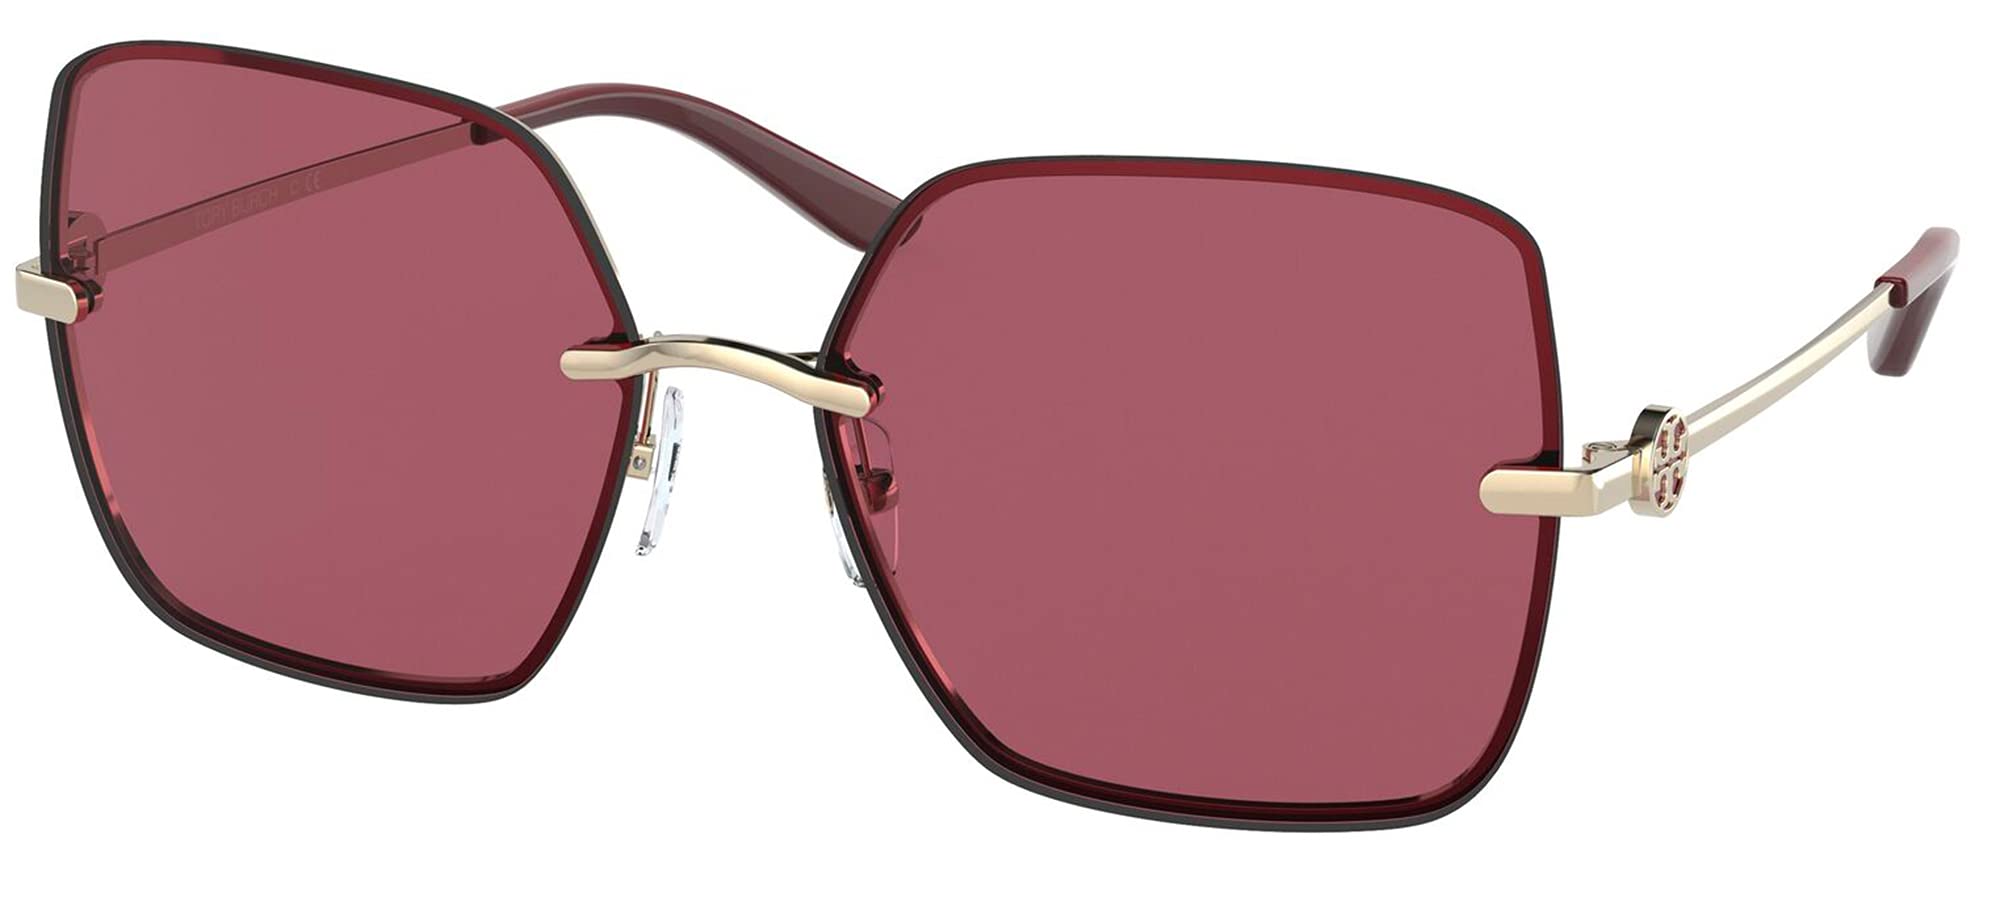 Tory Burch TY6080 Women's Sunglasses Gold/Solid Bordeaux 58